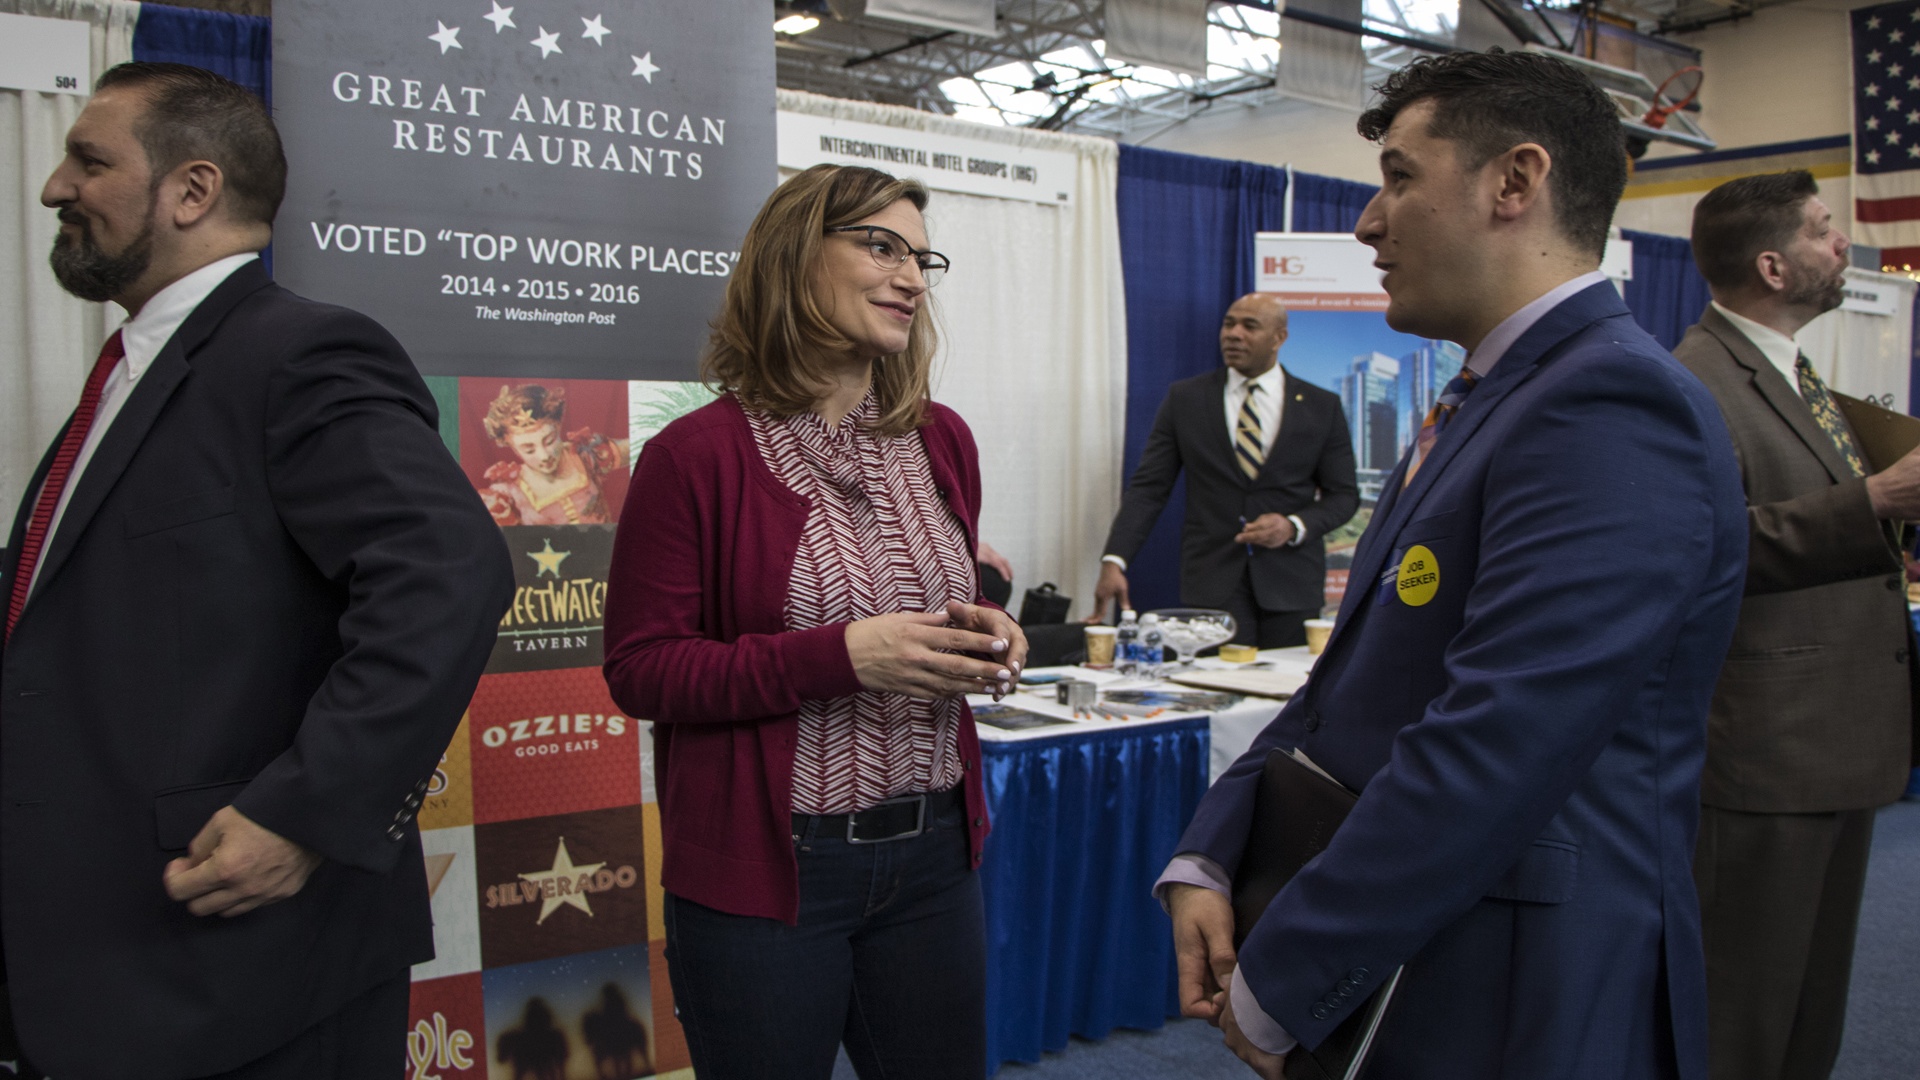 Rep from Great American Restaurants (center) talks with JWU student about career opportunities